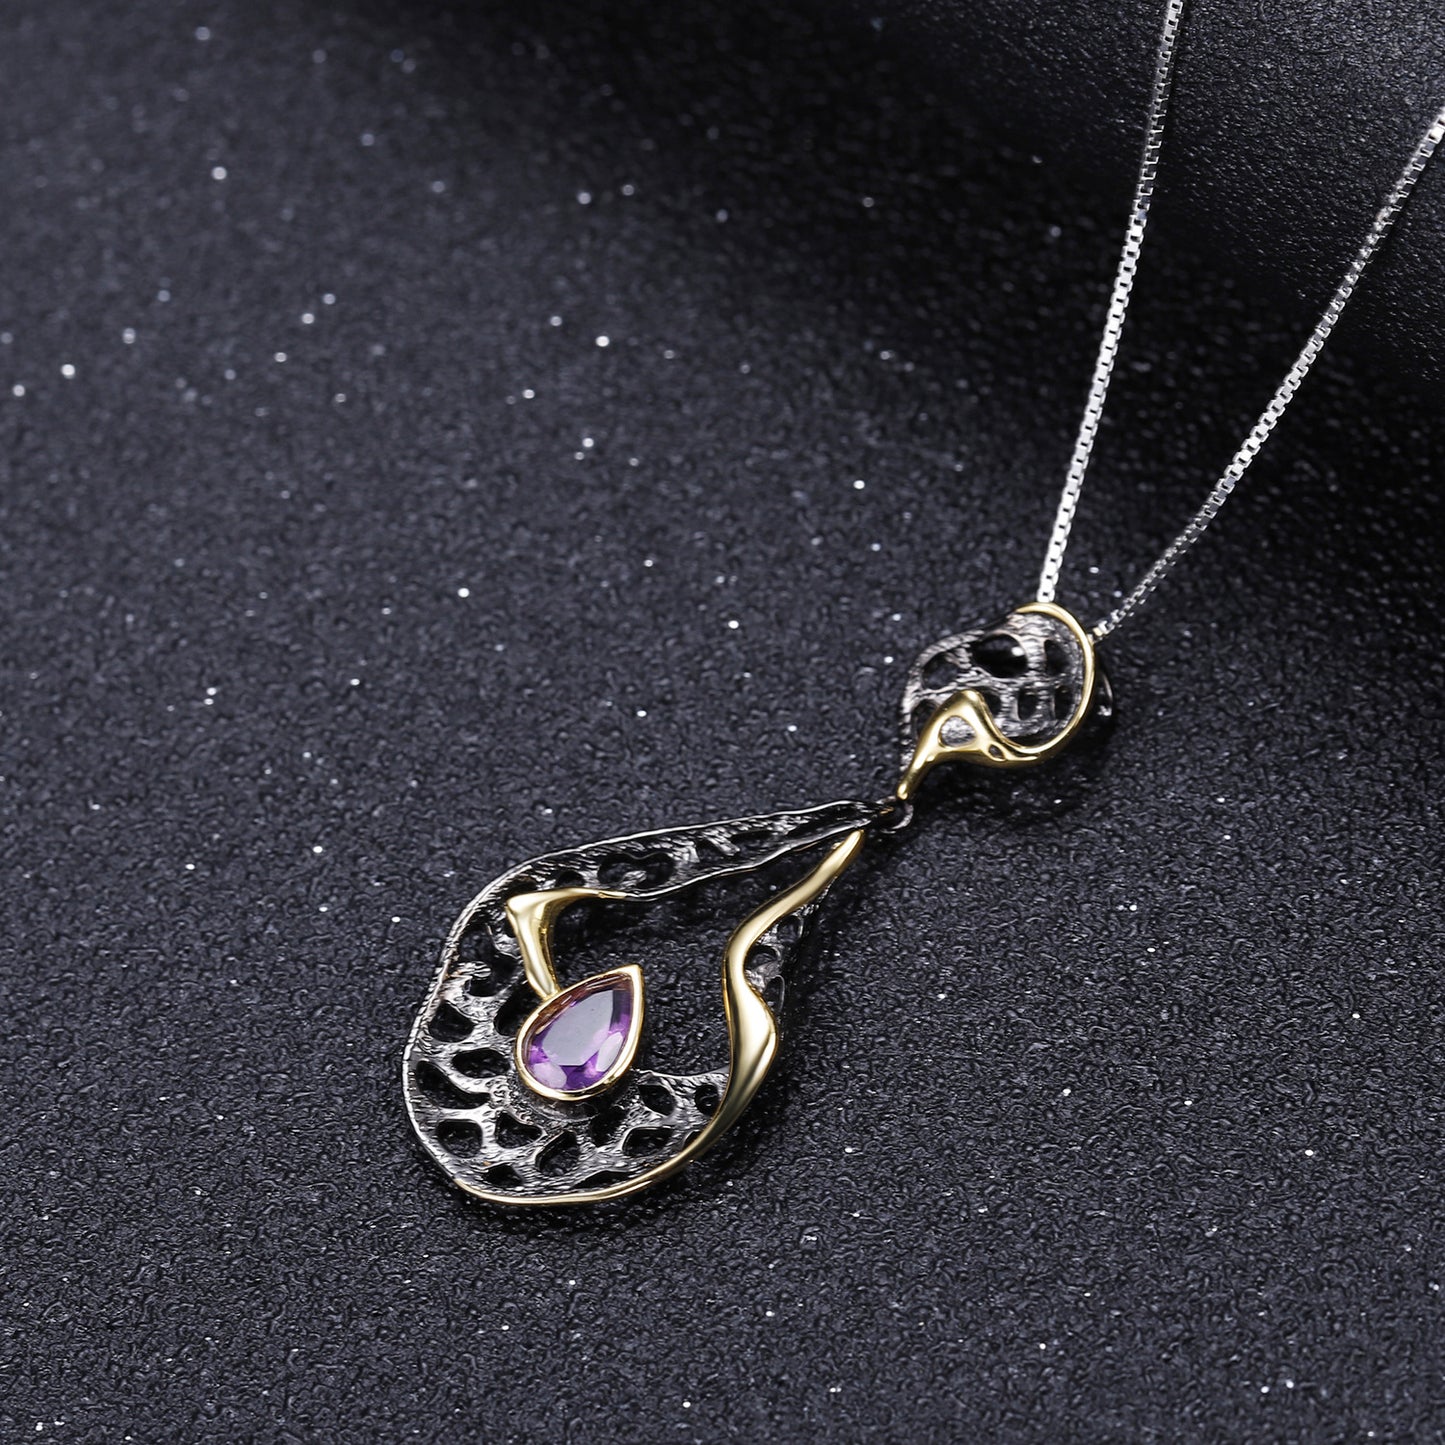 Italian Retro High Sense Design Inlaid Colourful Gemstone Water Droplet Pendant Silver Necklace for Women